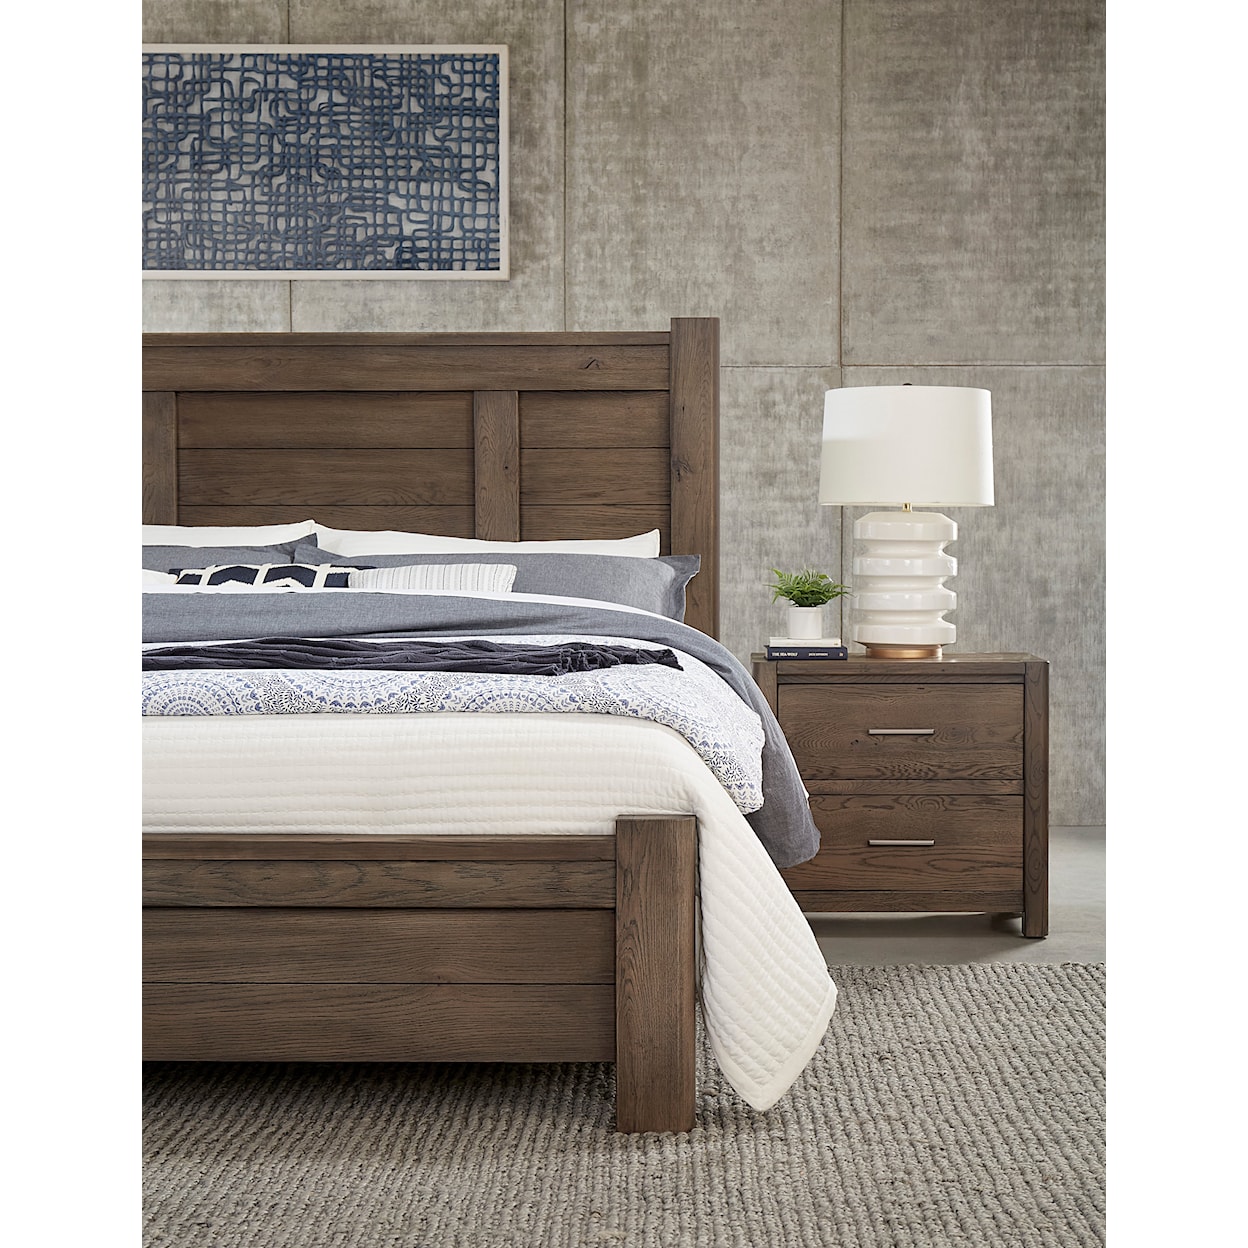 Vaughan Bassett Crafted Oak - Aged Grey King Poster Bed